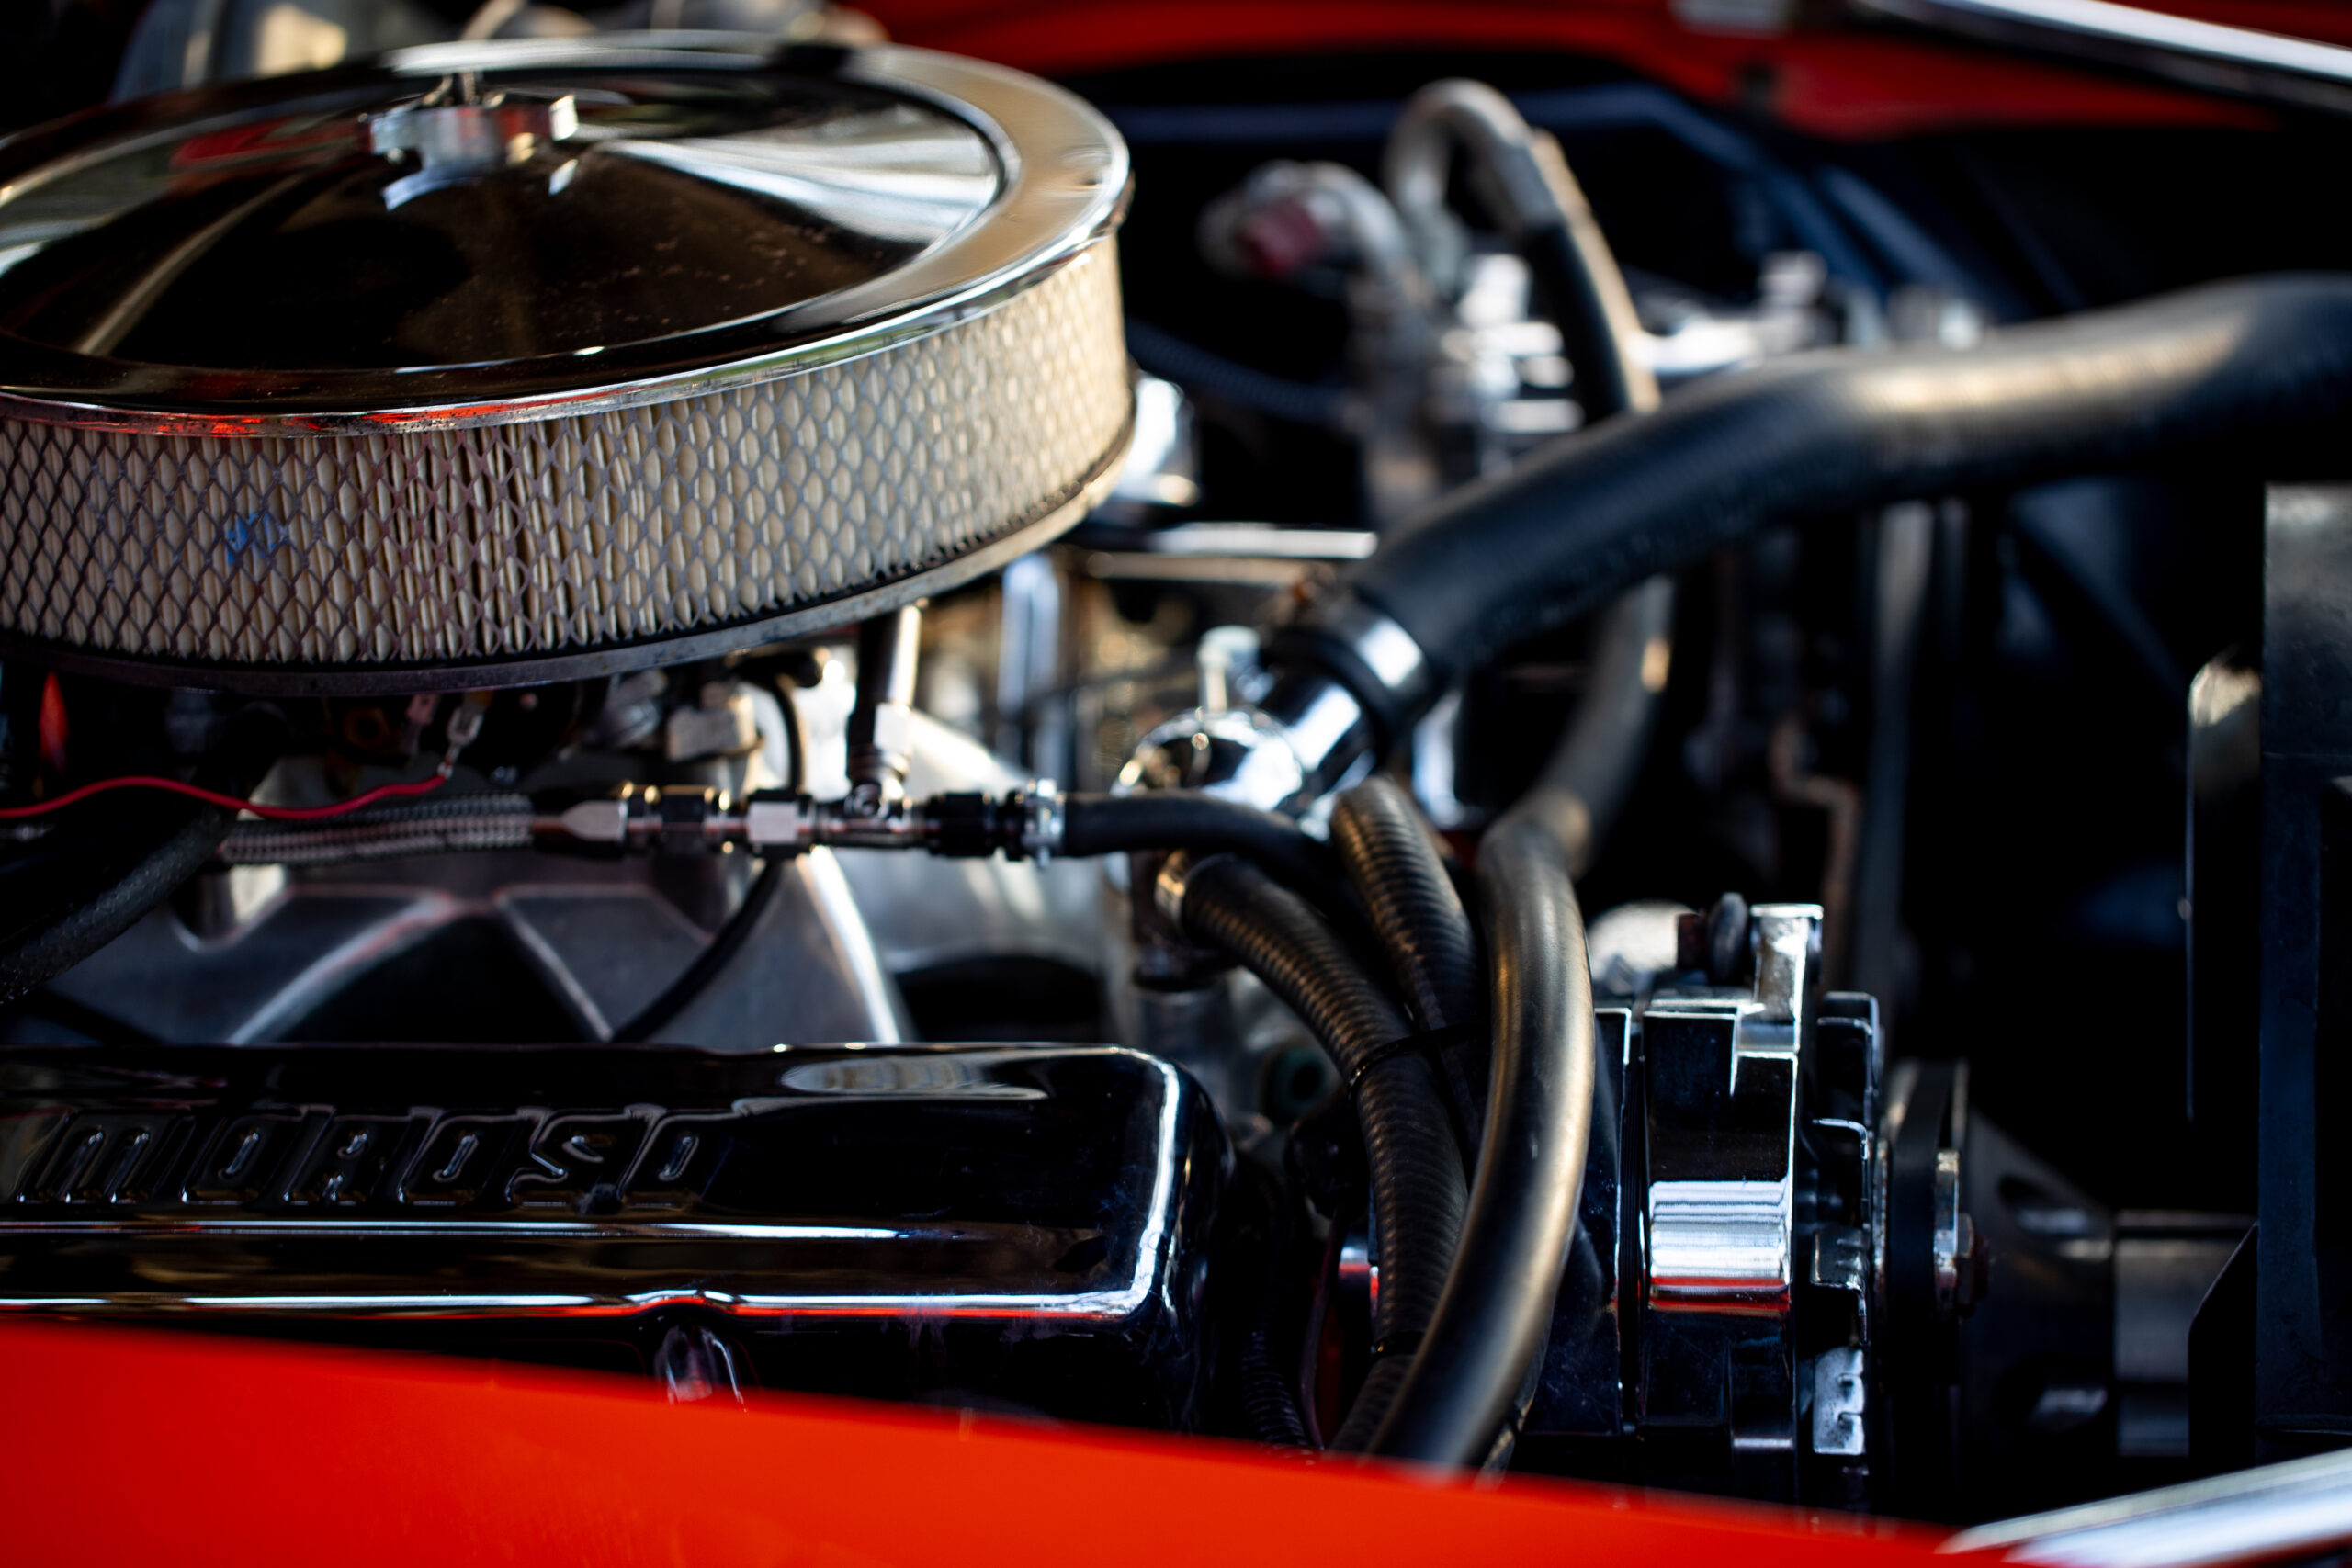 Close-up of a car engine showing polished components, black hoses, and a large circular air filter in a metal housing.